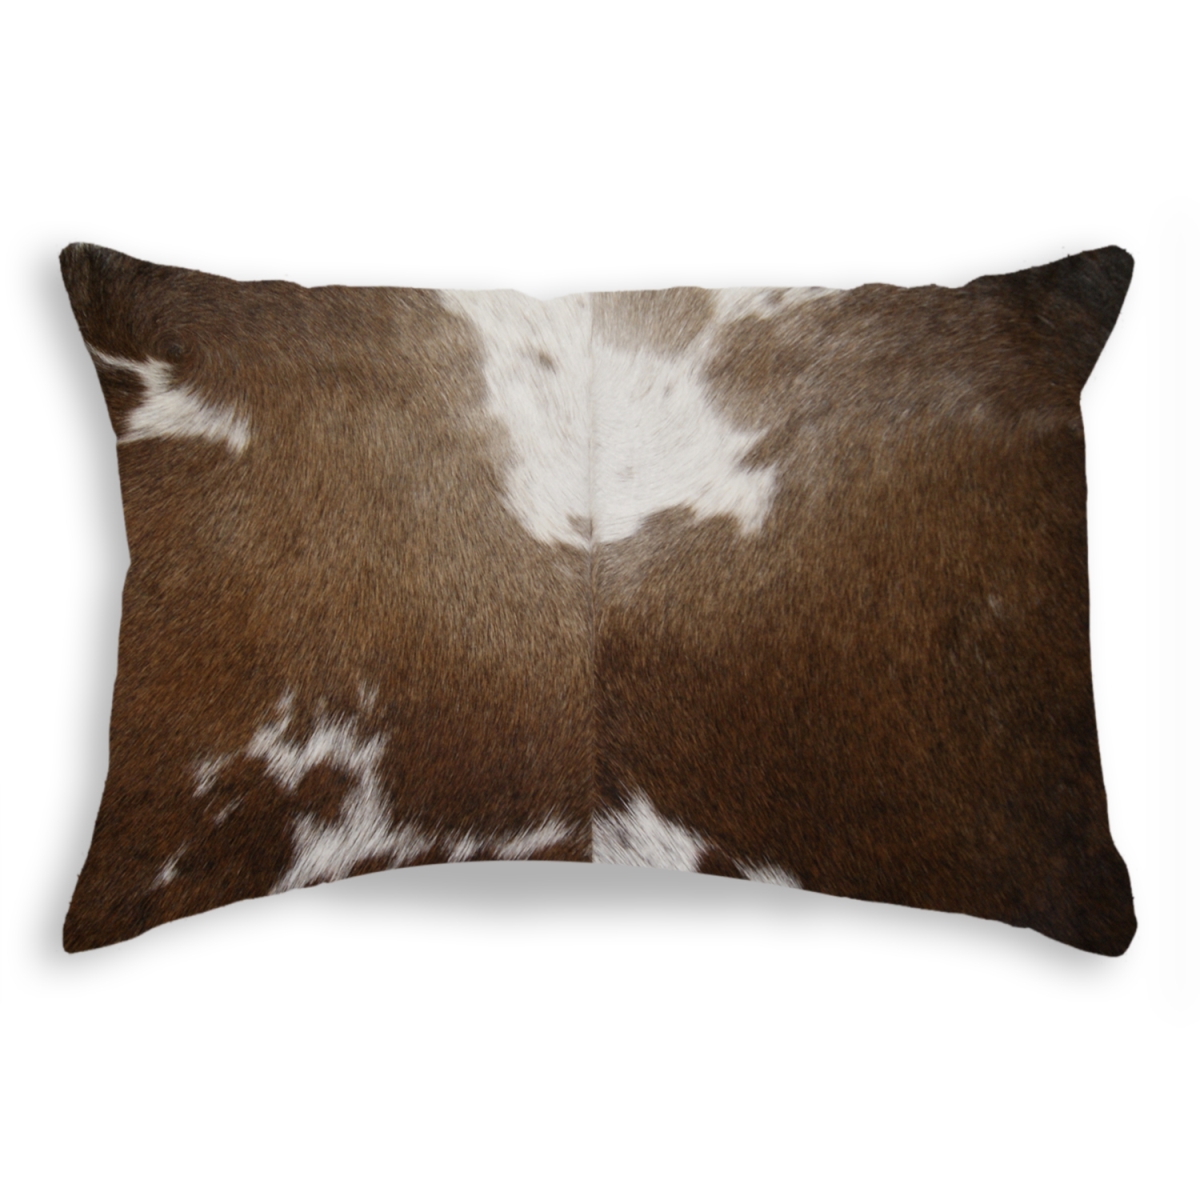 Home Roots Beddings 328242 Cowhide Pillow, Chocolate & White - 12 X 20 In.